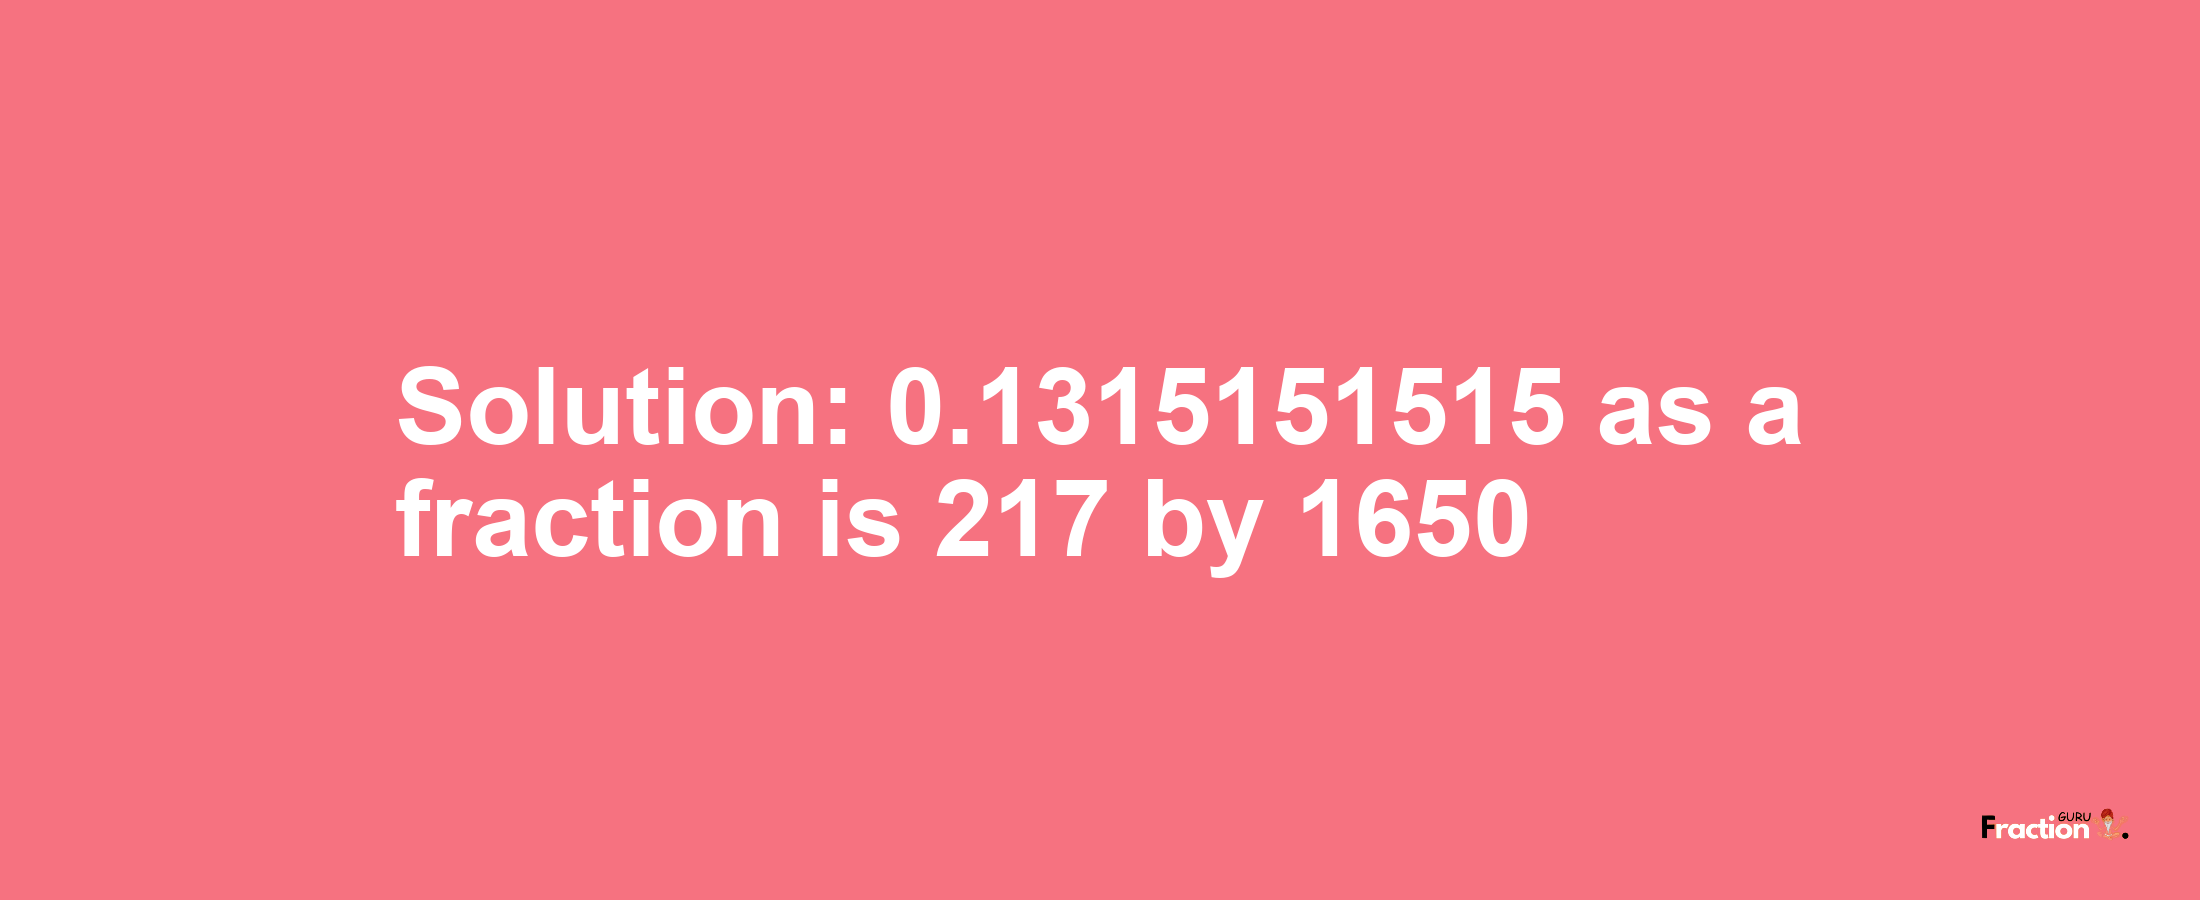 Solution:0.1315151515 as a fraction is 217/1650